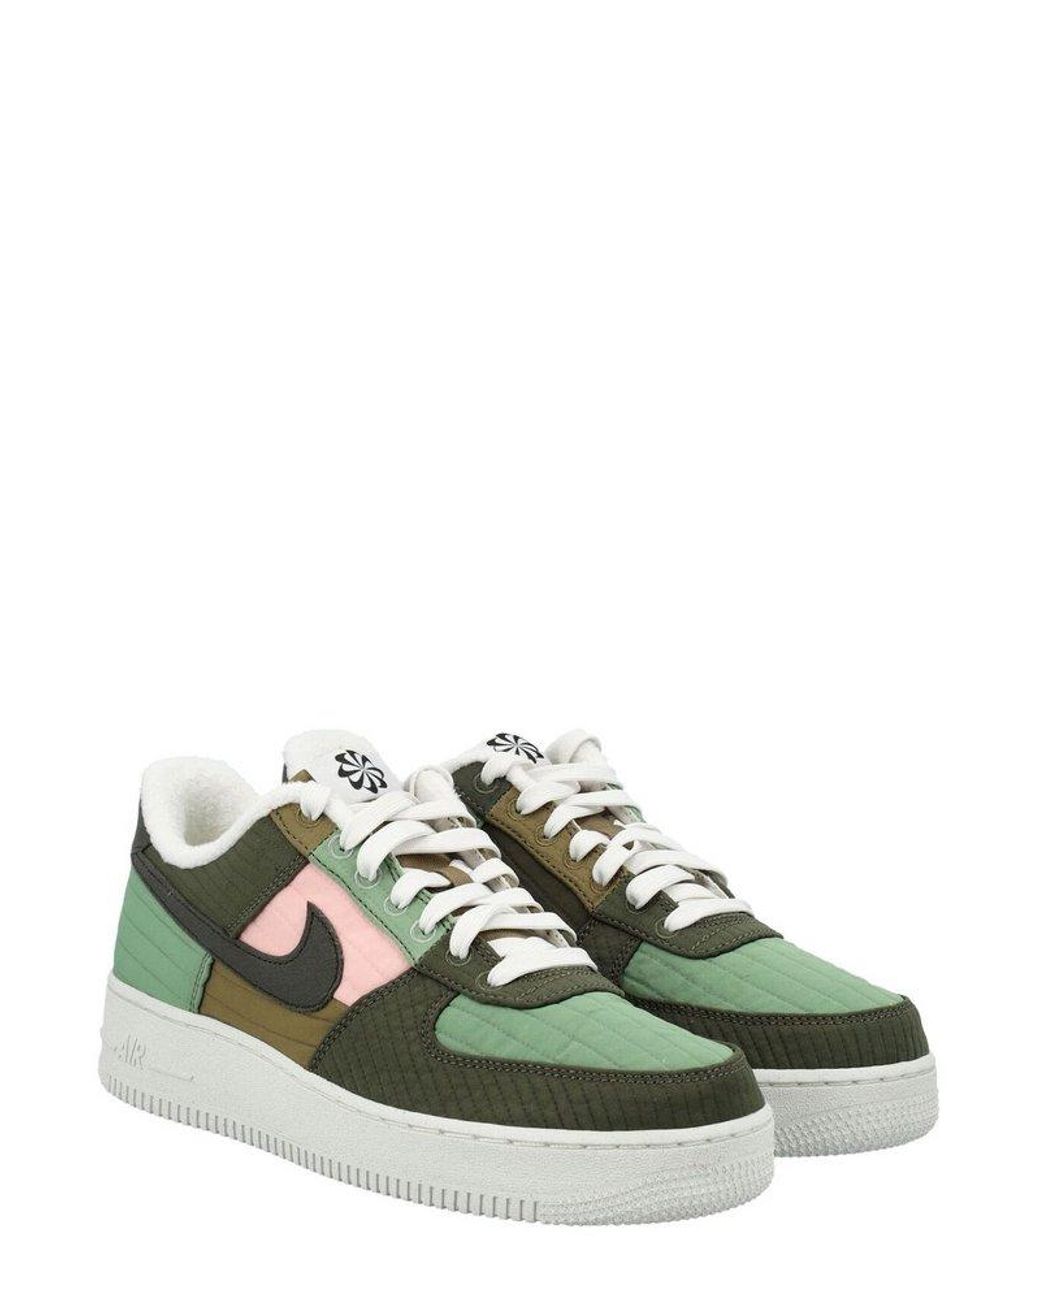 Nike Air Force 1 Colour-block Sneakers in Green | Lyst